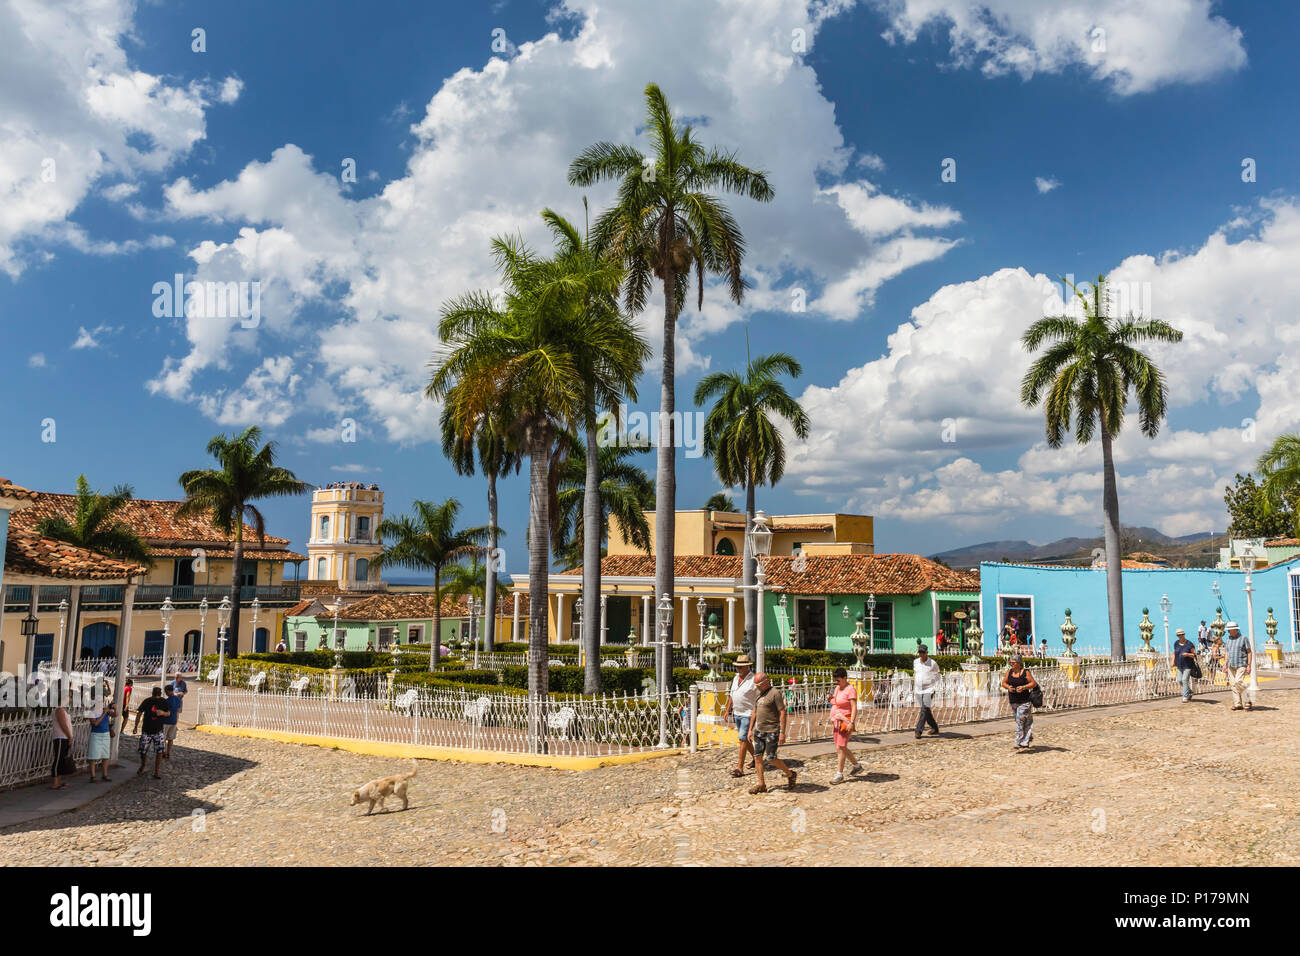 A view of the Plaza Mayor in the UNESCO World Heritage site city of Trinidad, Cuba. Stock Photo